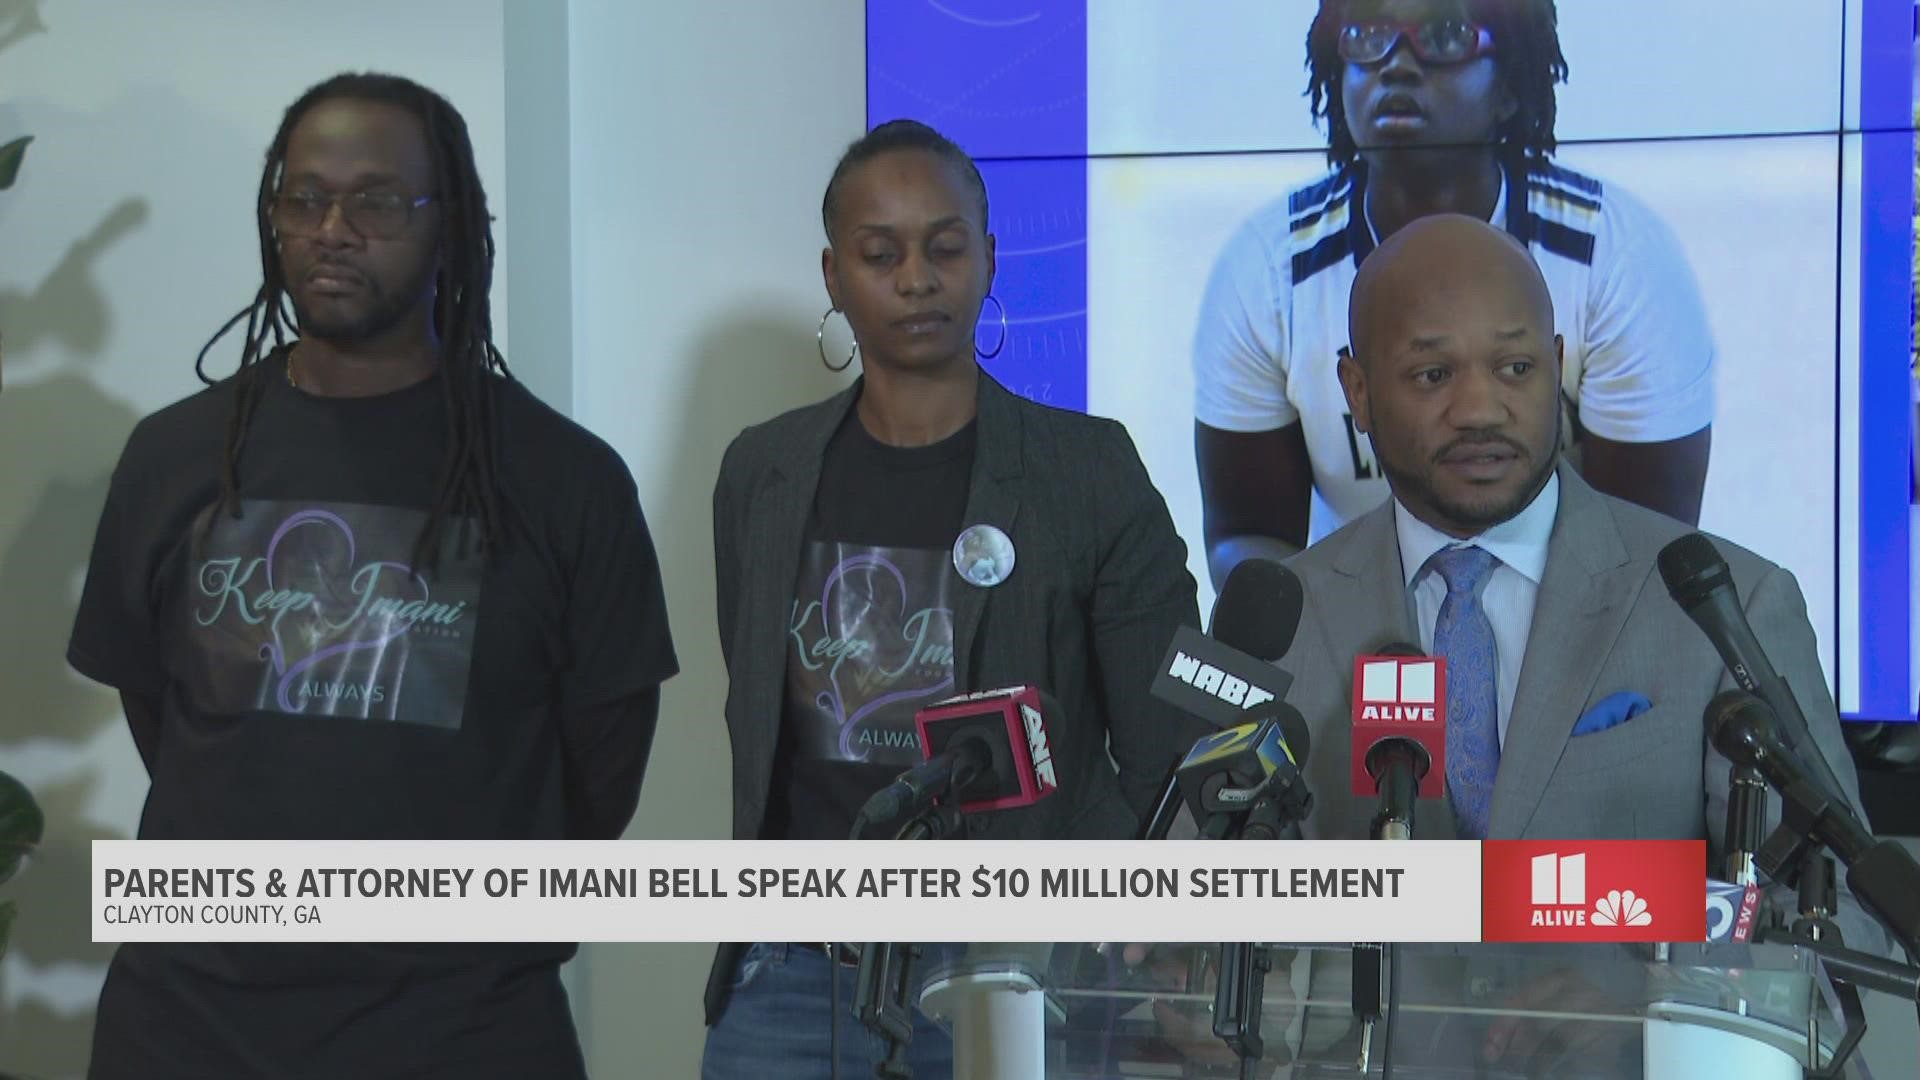 The attorneys for Imani Bell speak about the importance of the settlement.